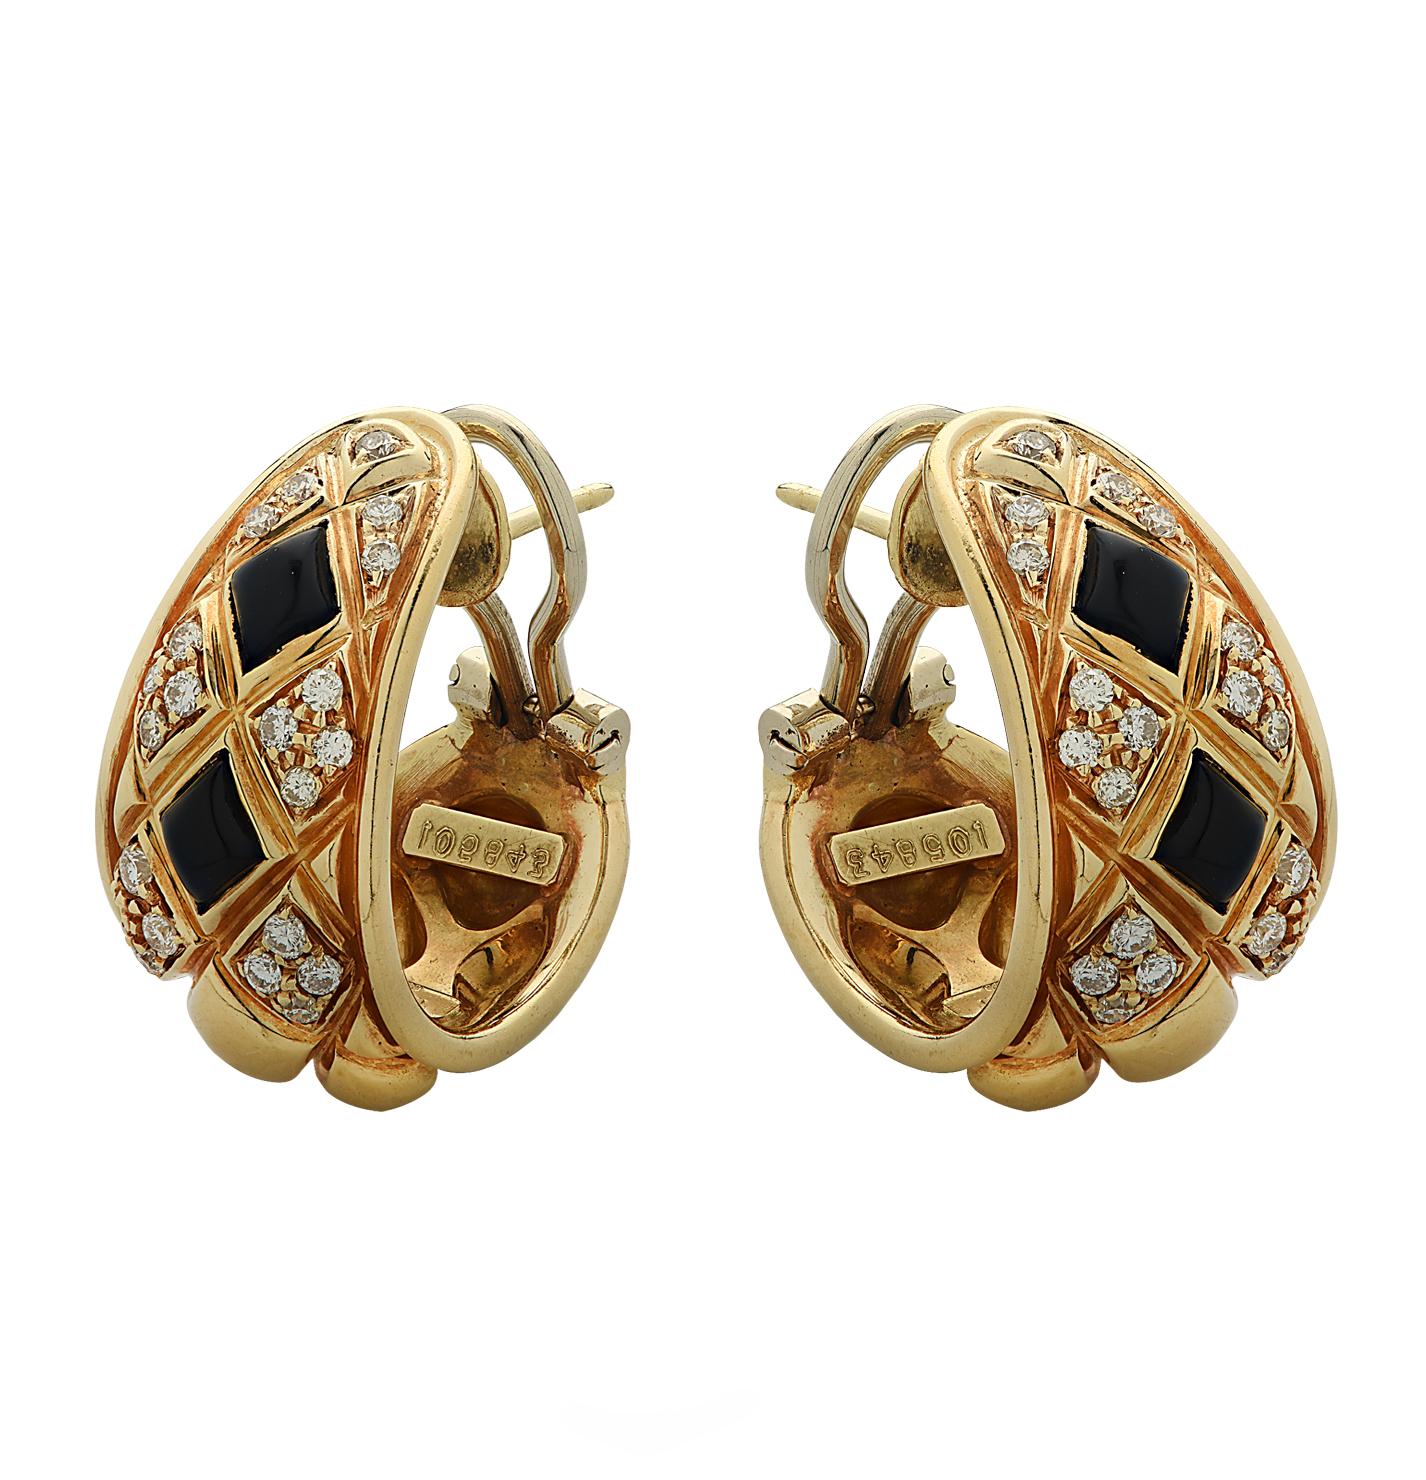 Striking Chaumet Paris hoop earrings crafted in 18 karat yellow gold. The quilted hoops are adorned with onyx and 40 round brilliant cut diamonds weighing approximately  .70 carats total, G color, VS clarity. These stunning earrings have posts and